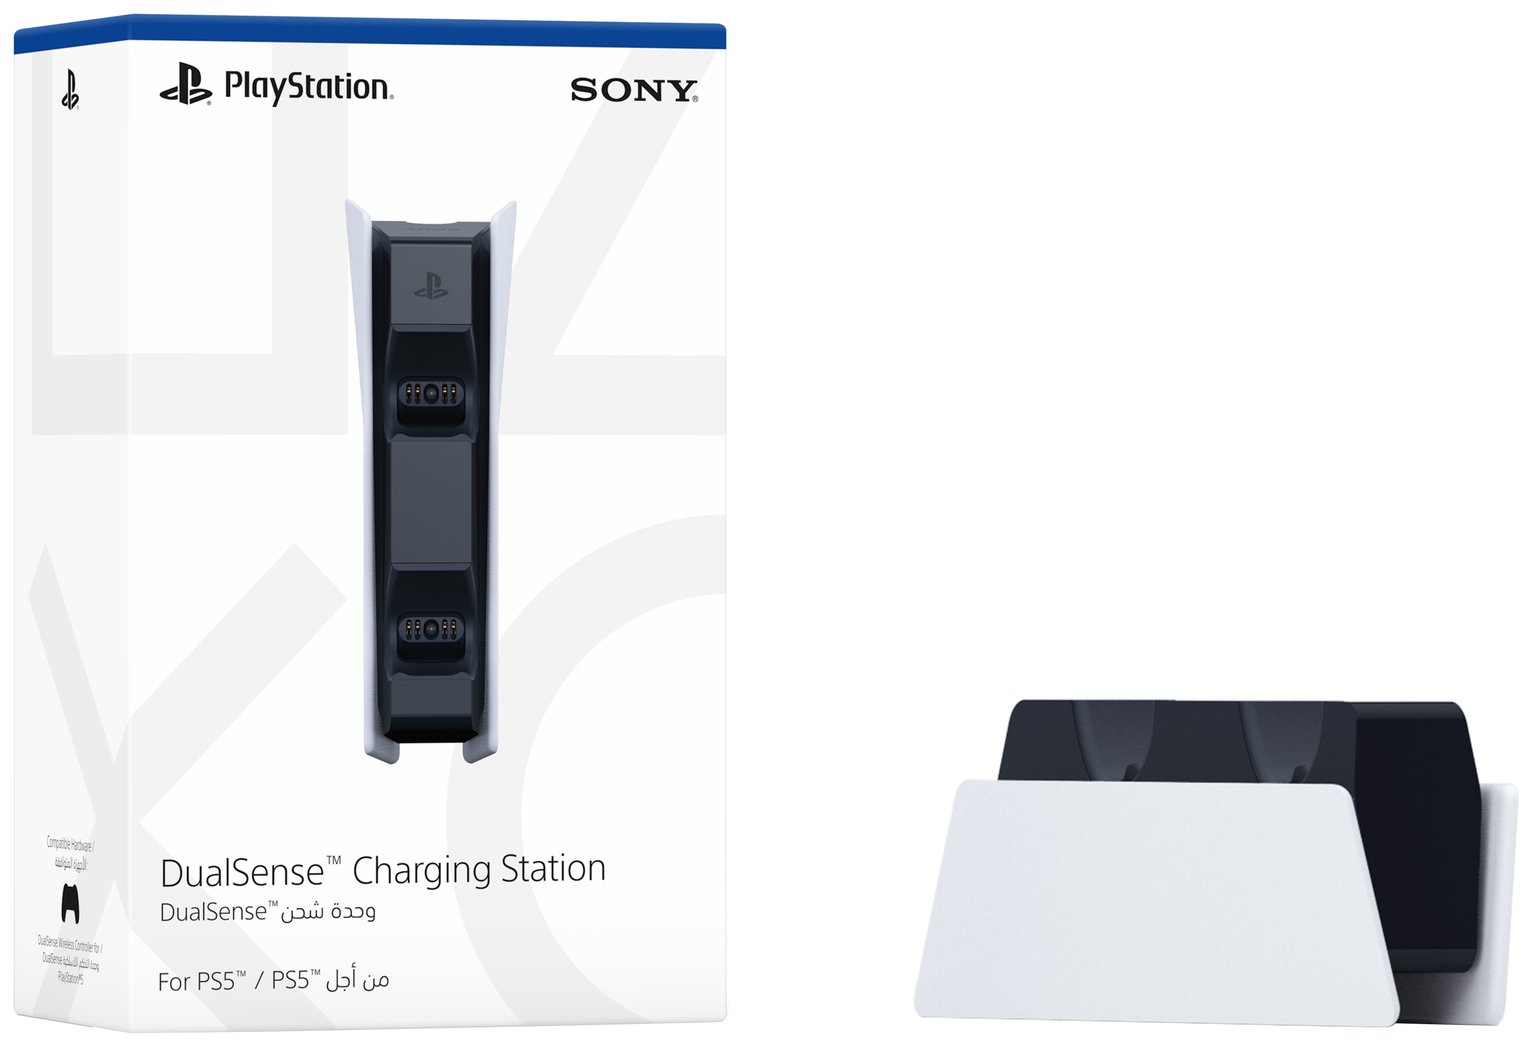 dualsense charging station for playstation 5